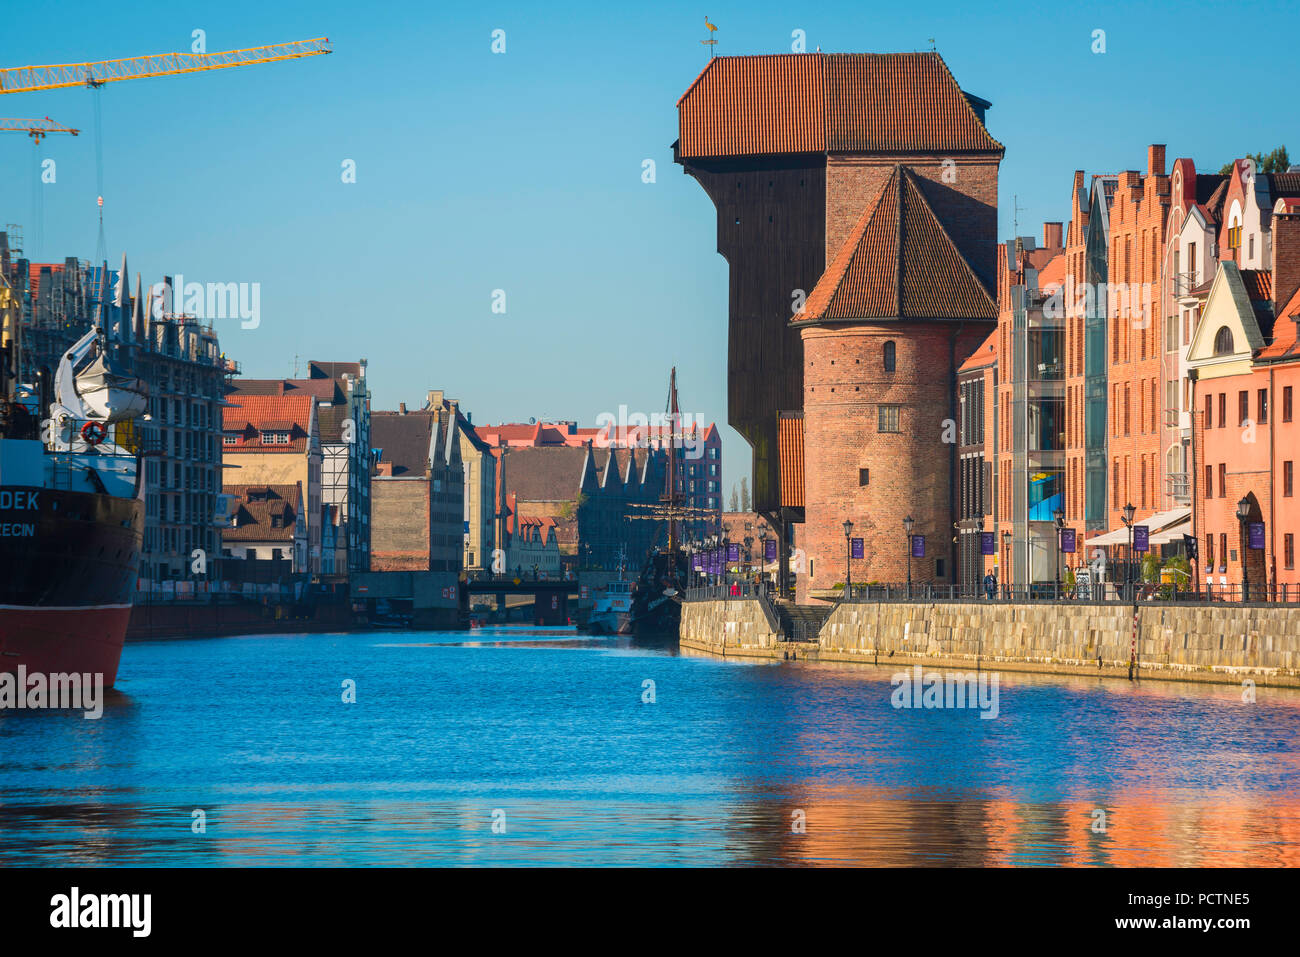 Gdansk crane Zuraw, view of the Zuraw - the largest medieval crane in Europe sited alongside the Motlawa River in the Old Town area of Gdansk, Poland. Stock Photo